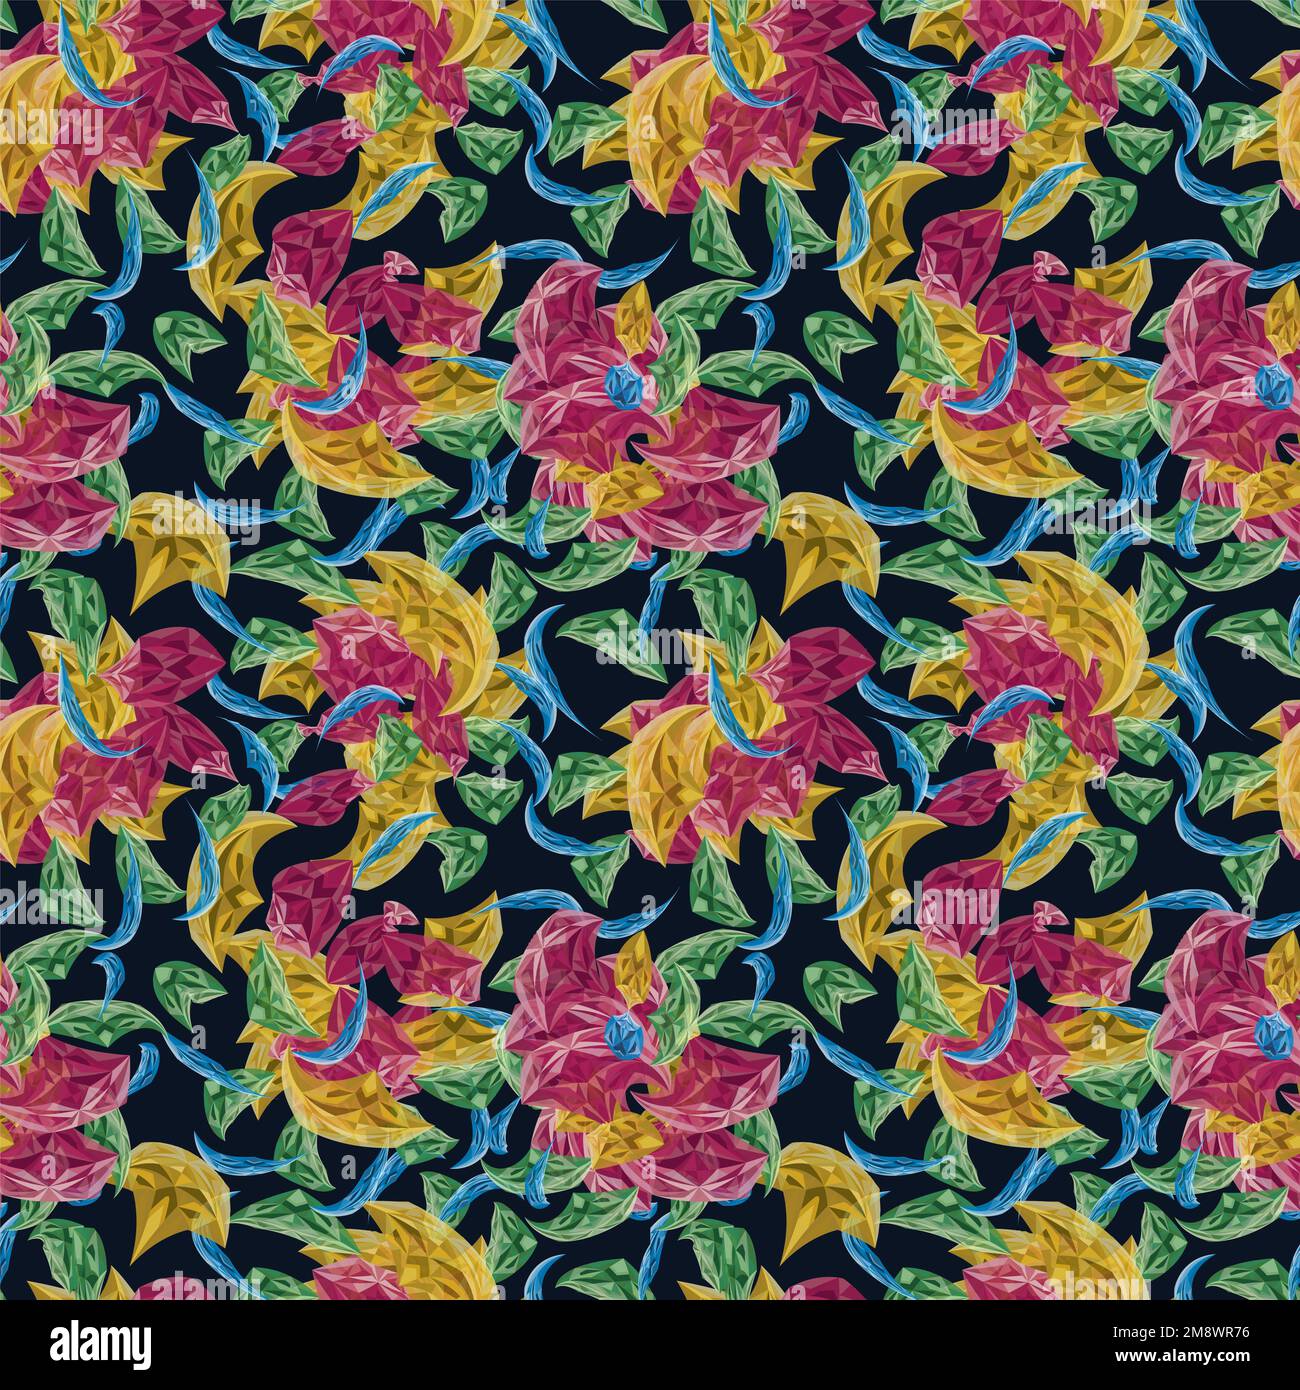 Seamless simple cute pattern of colorful curled design elements like flowers or plants on navy background.Endless ornament.Colourful backdrop Stock Photo